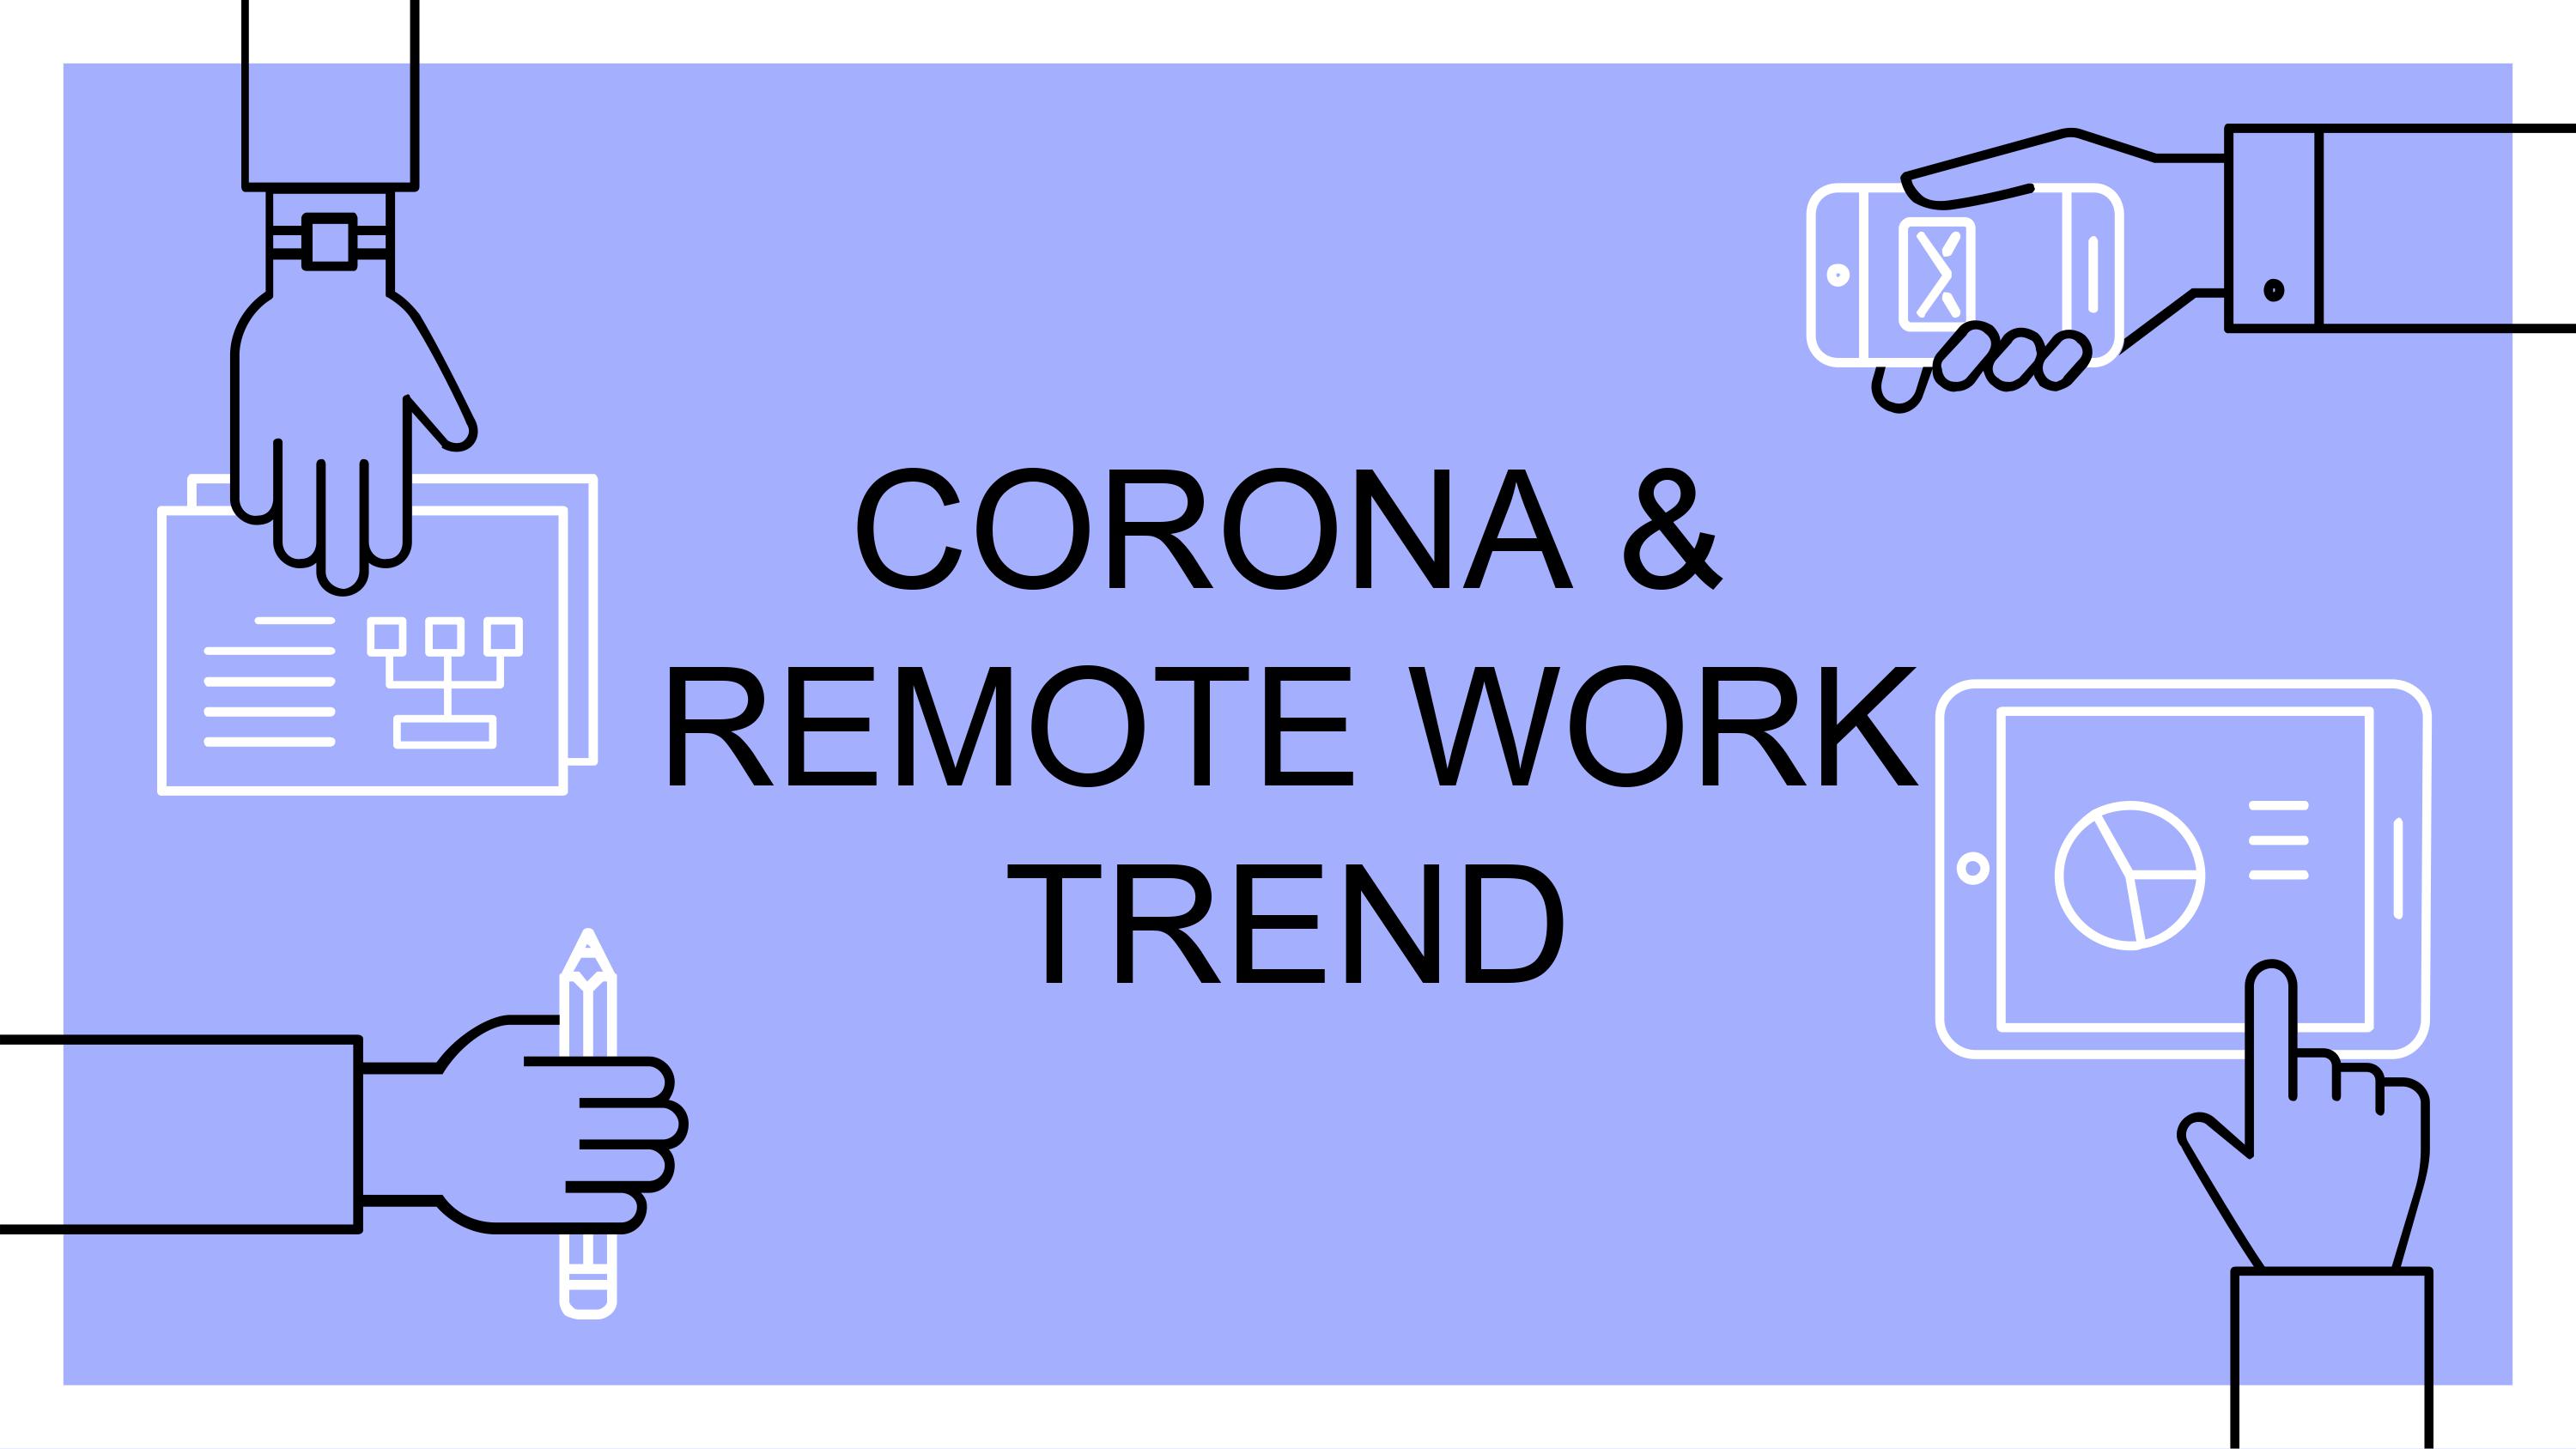 Coronavirus and Work from home productively